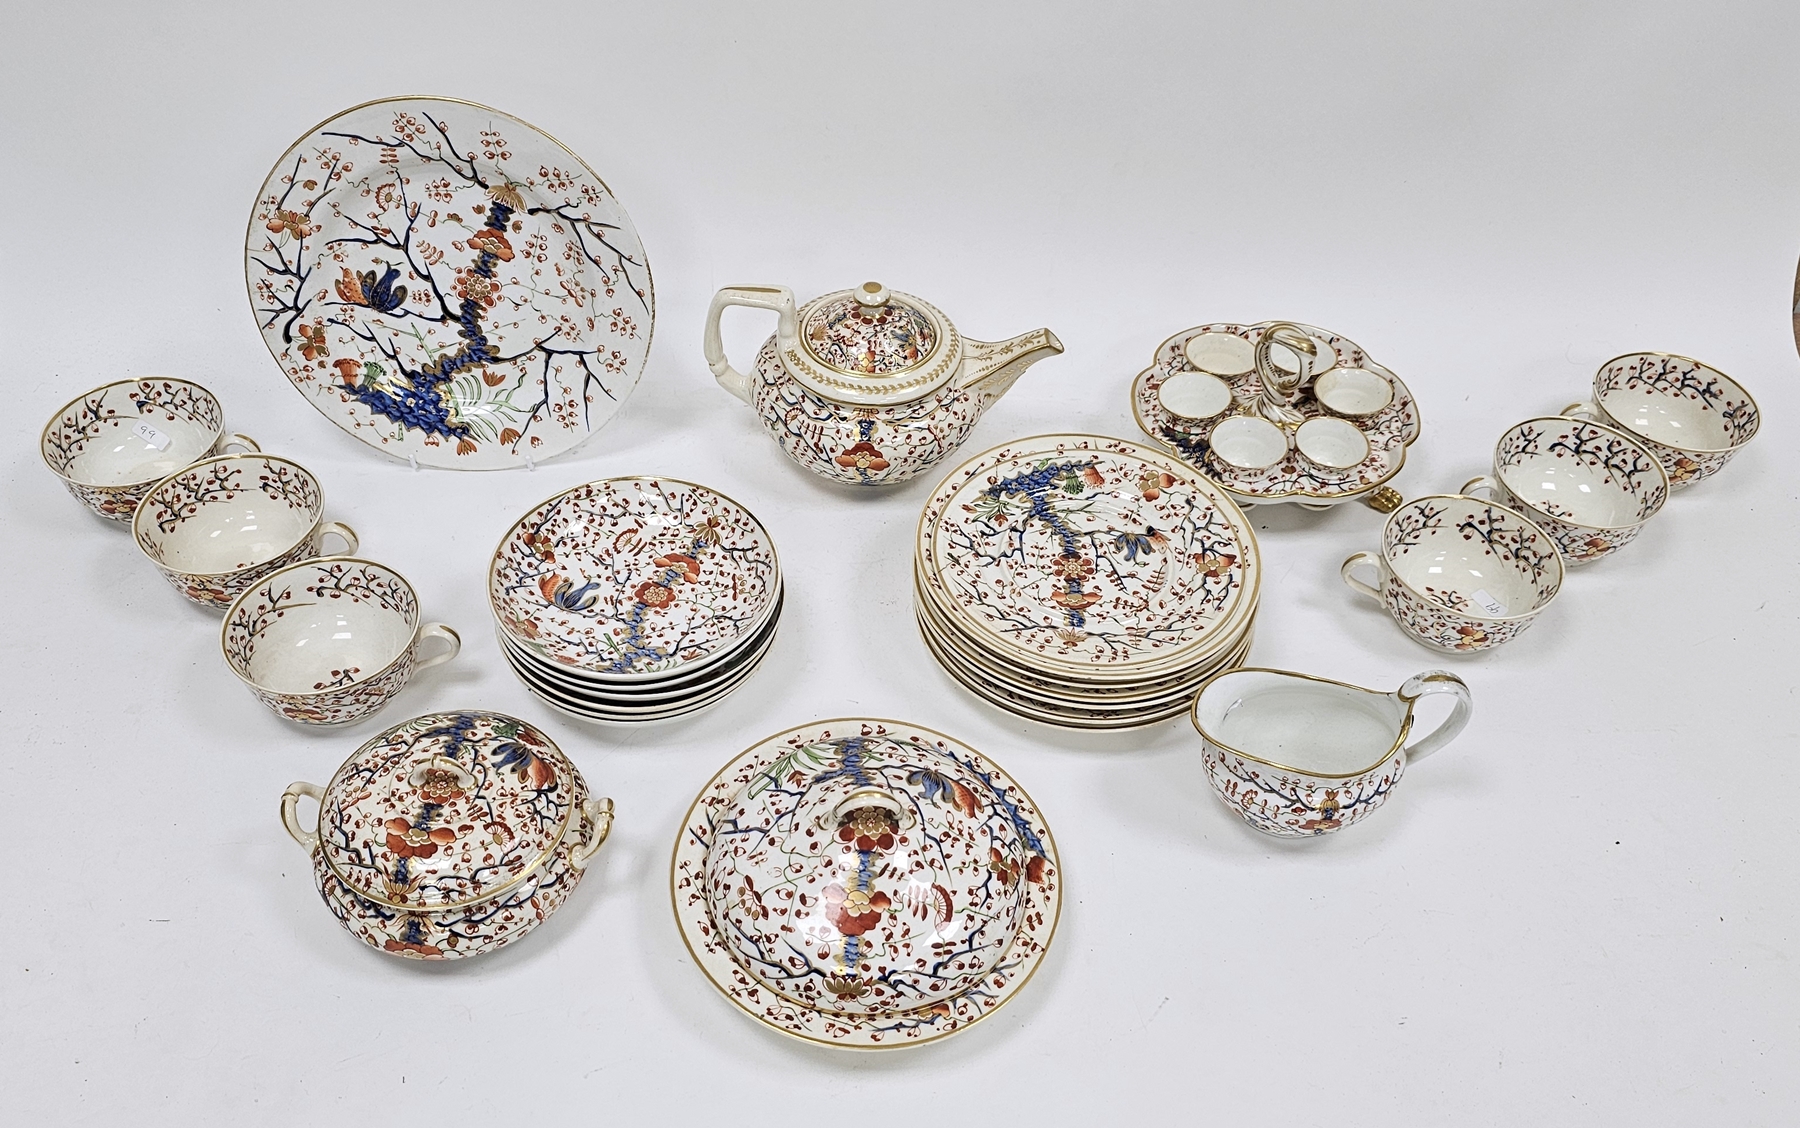 Derby porcelain imari pattern part breakfast service, mid 19th century, iron red crown batons - Image 2 of 3